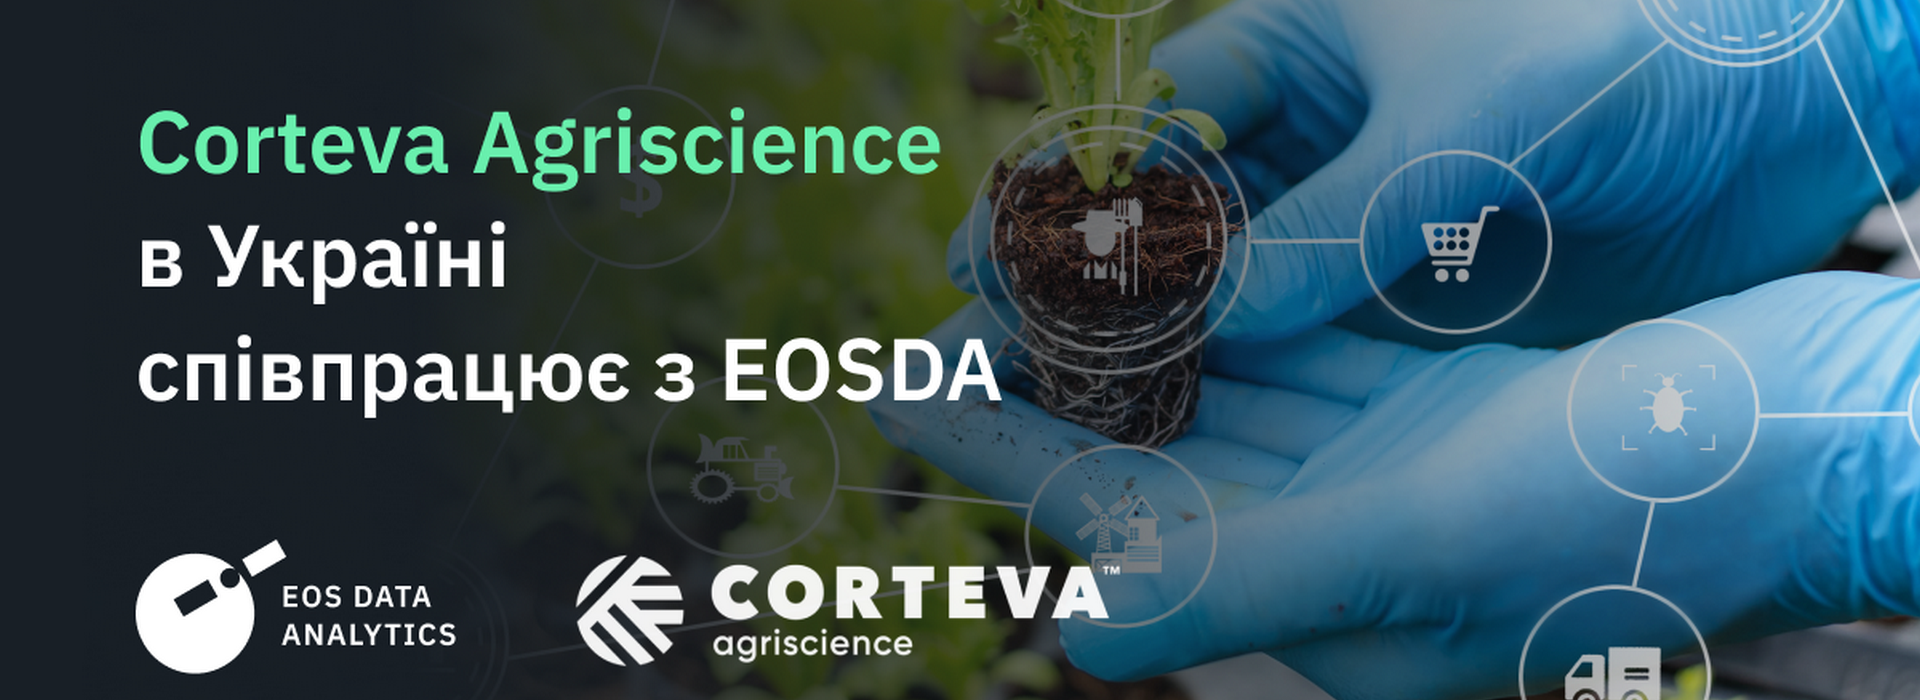 Corteva Agriscience Will Work with Satellite Analytics to Strengthen Agronomic Support for Ukrainian Farmers